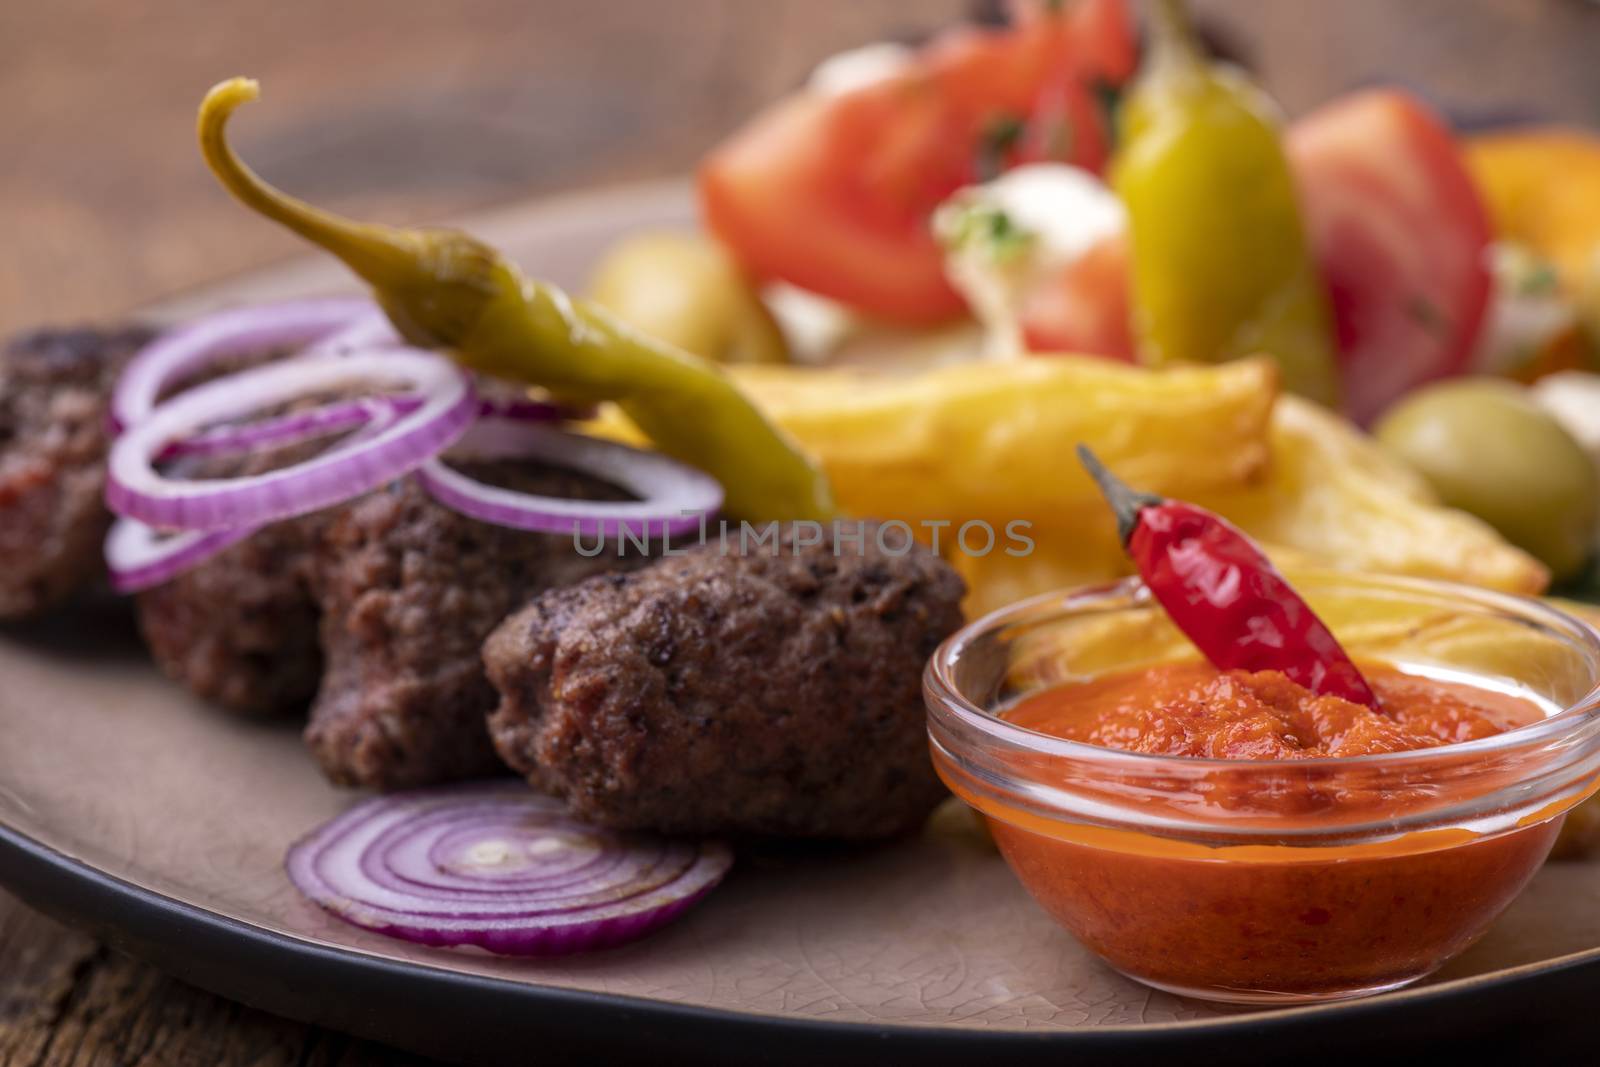 cevapcici on a plate with french fries